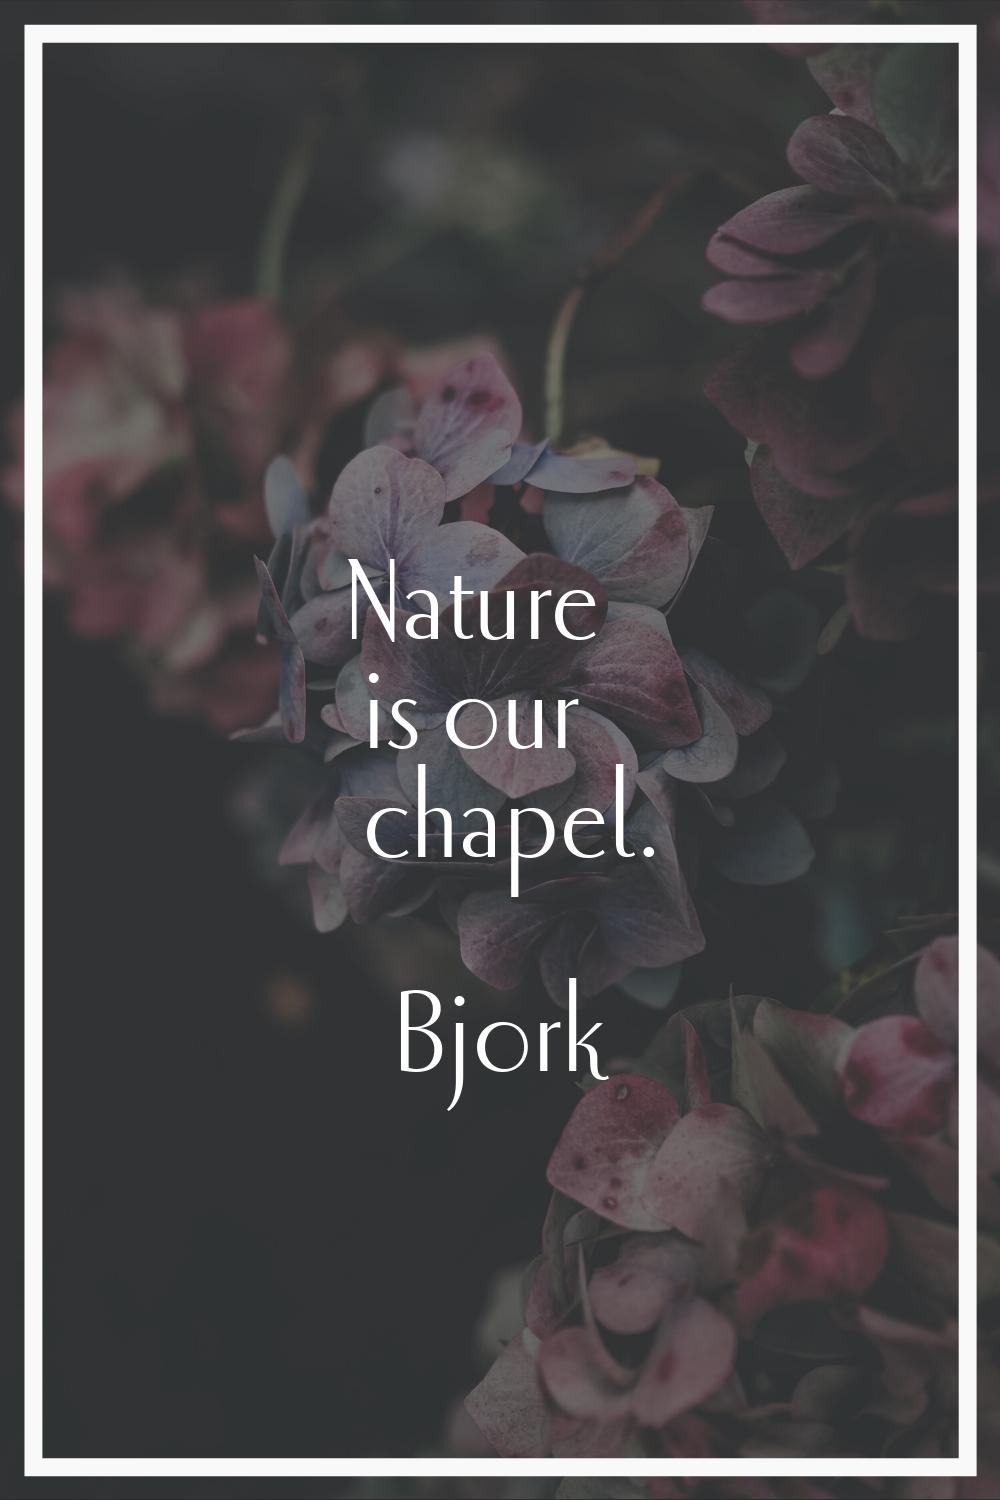 Nature is our chapel.